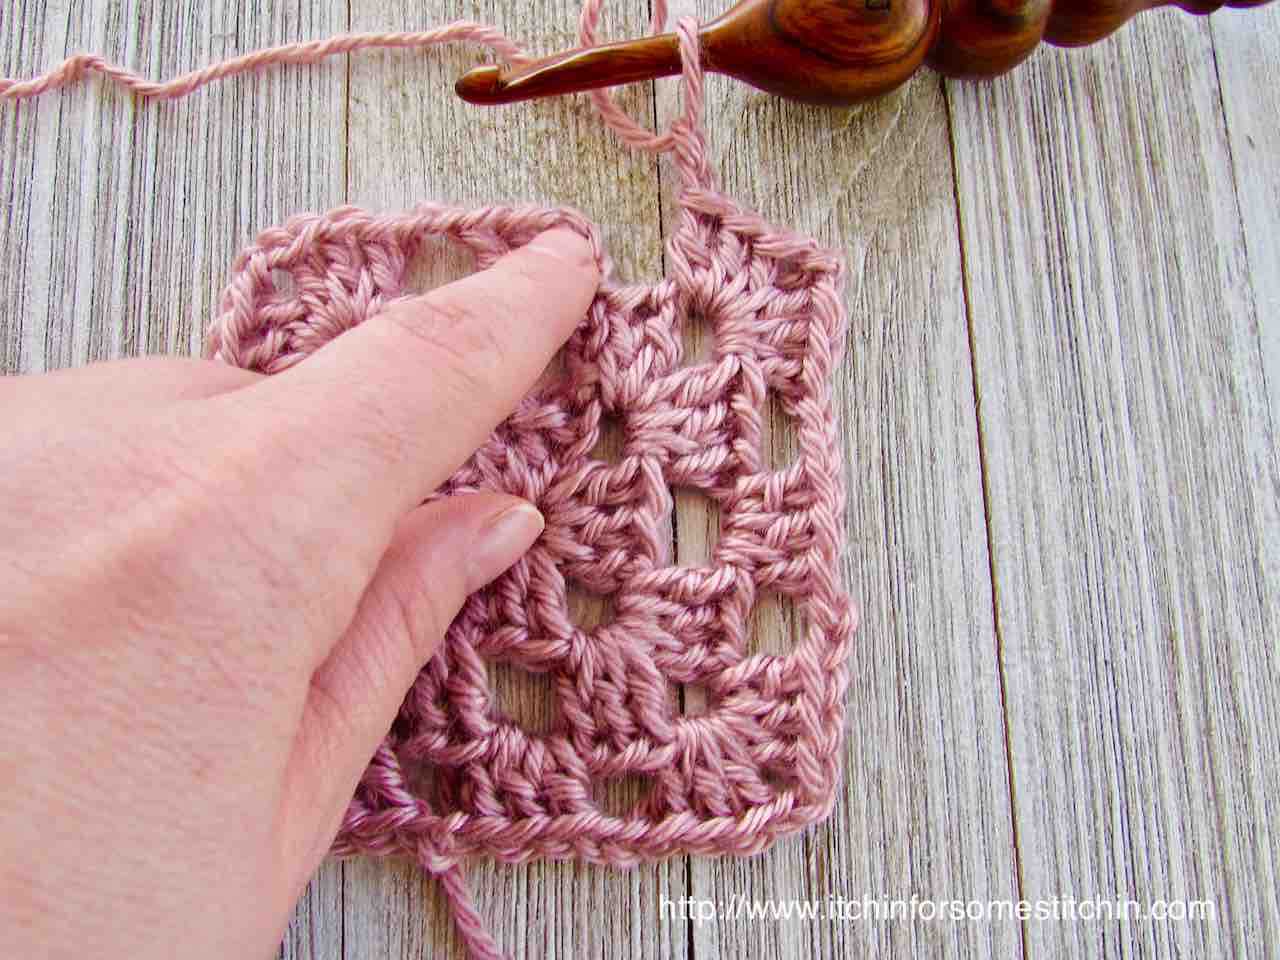 How to Crochet a Basic Granny Square by http://www.itchinforsomestitchin.com